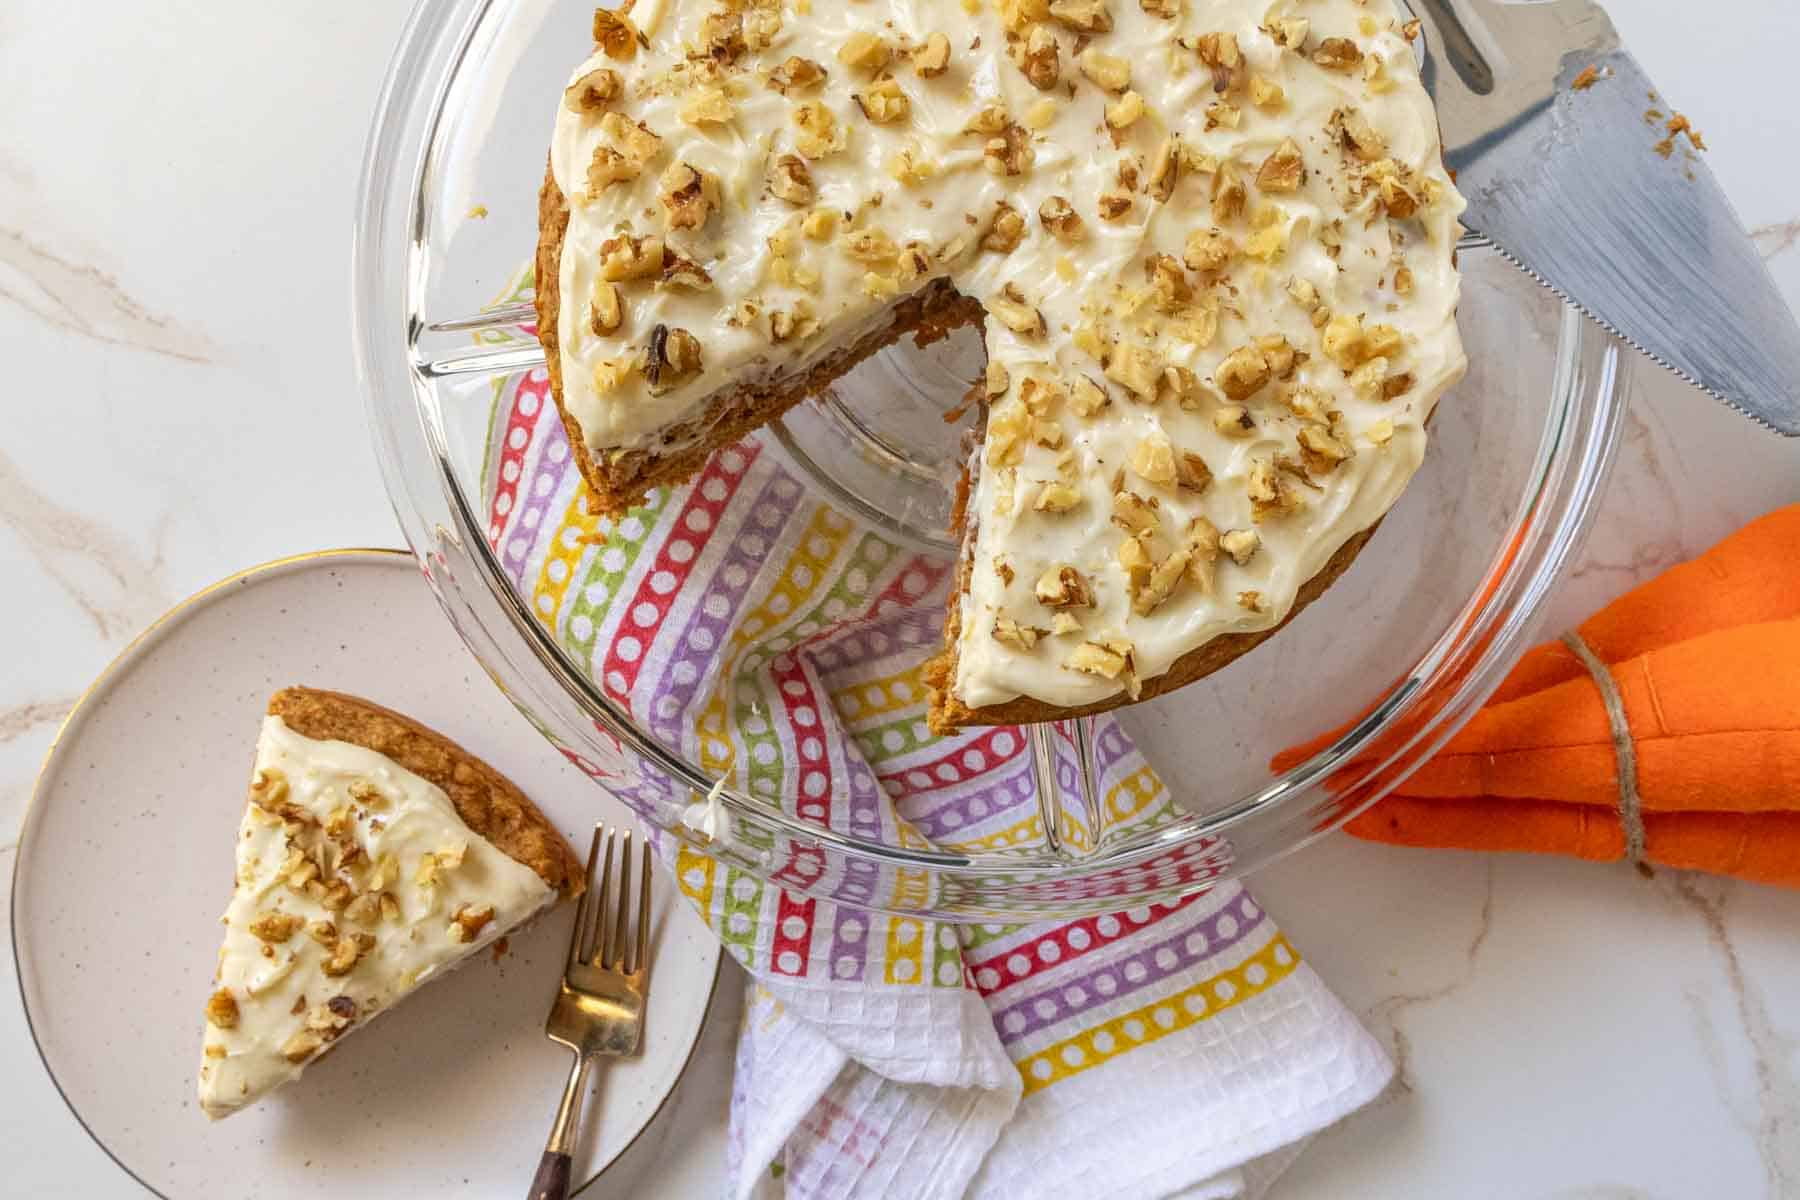 A carrot cake with cream cheese frosting and chopped nuts, with one slice served on a plate.